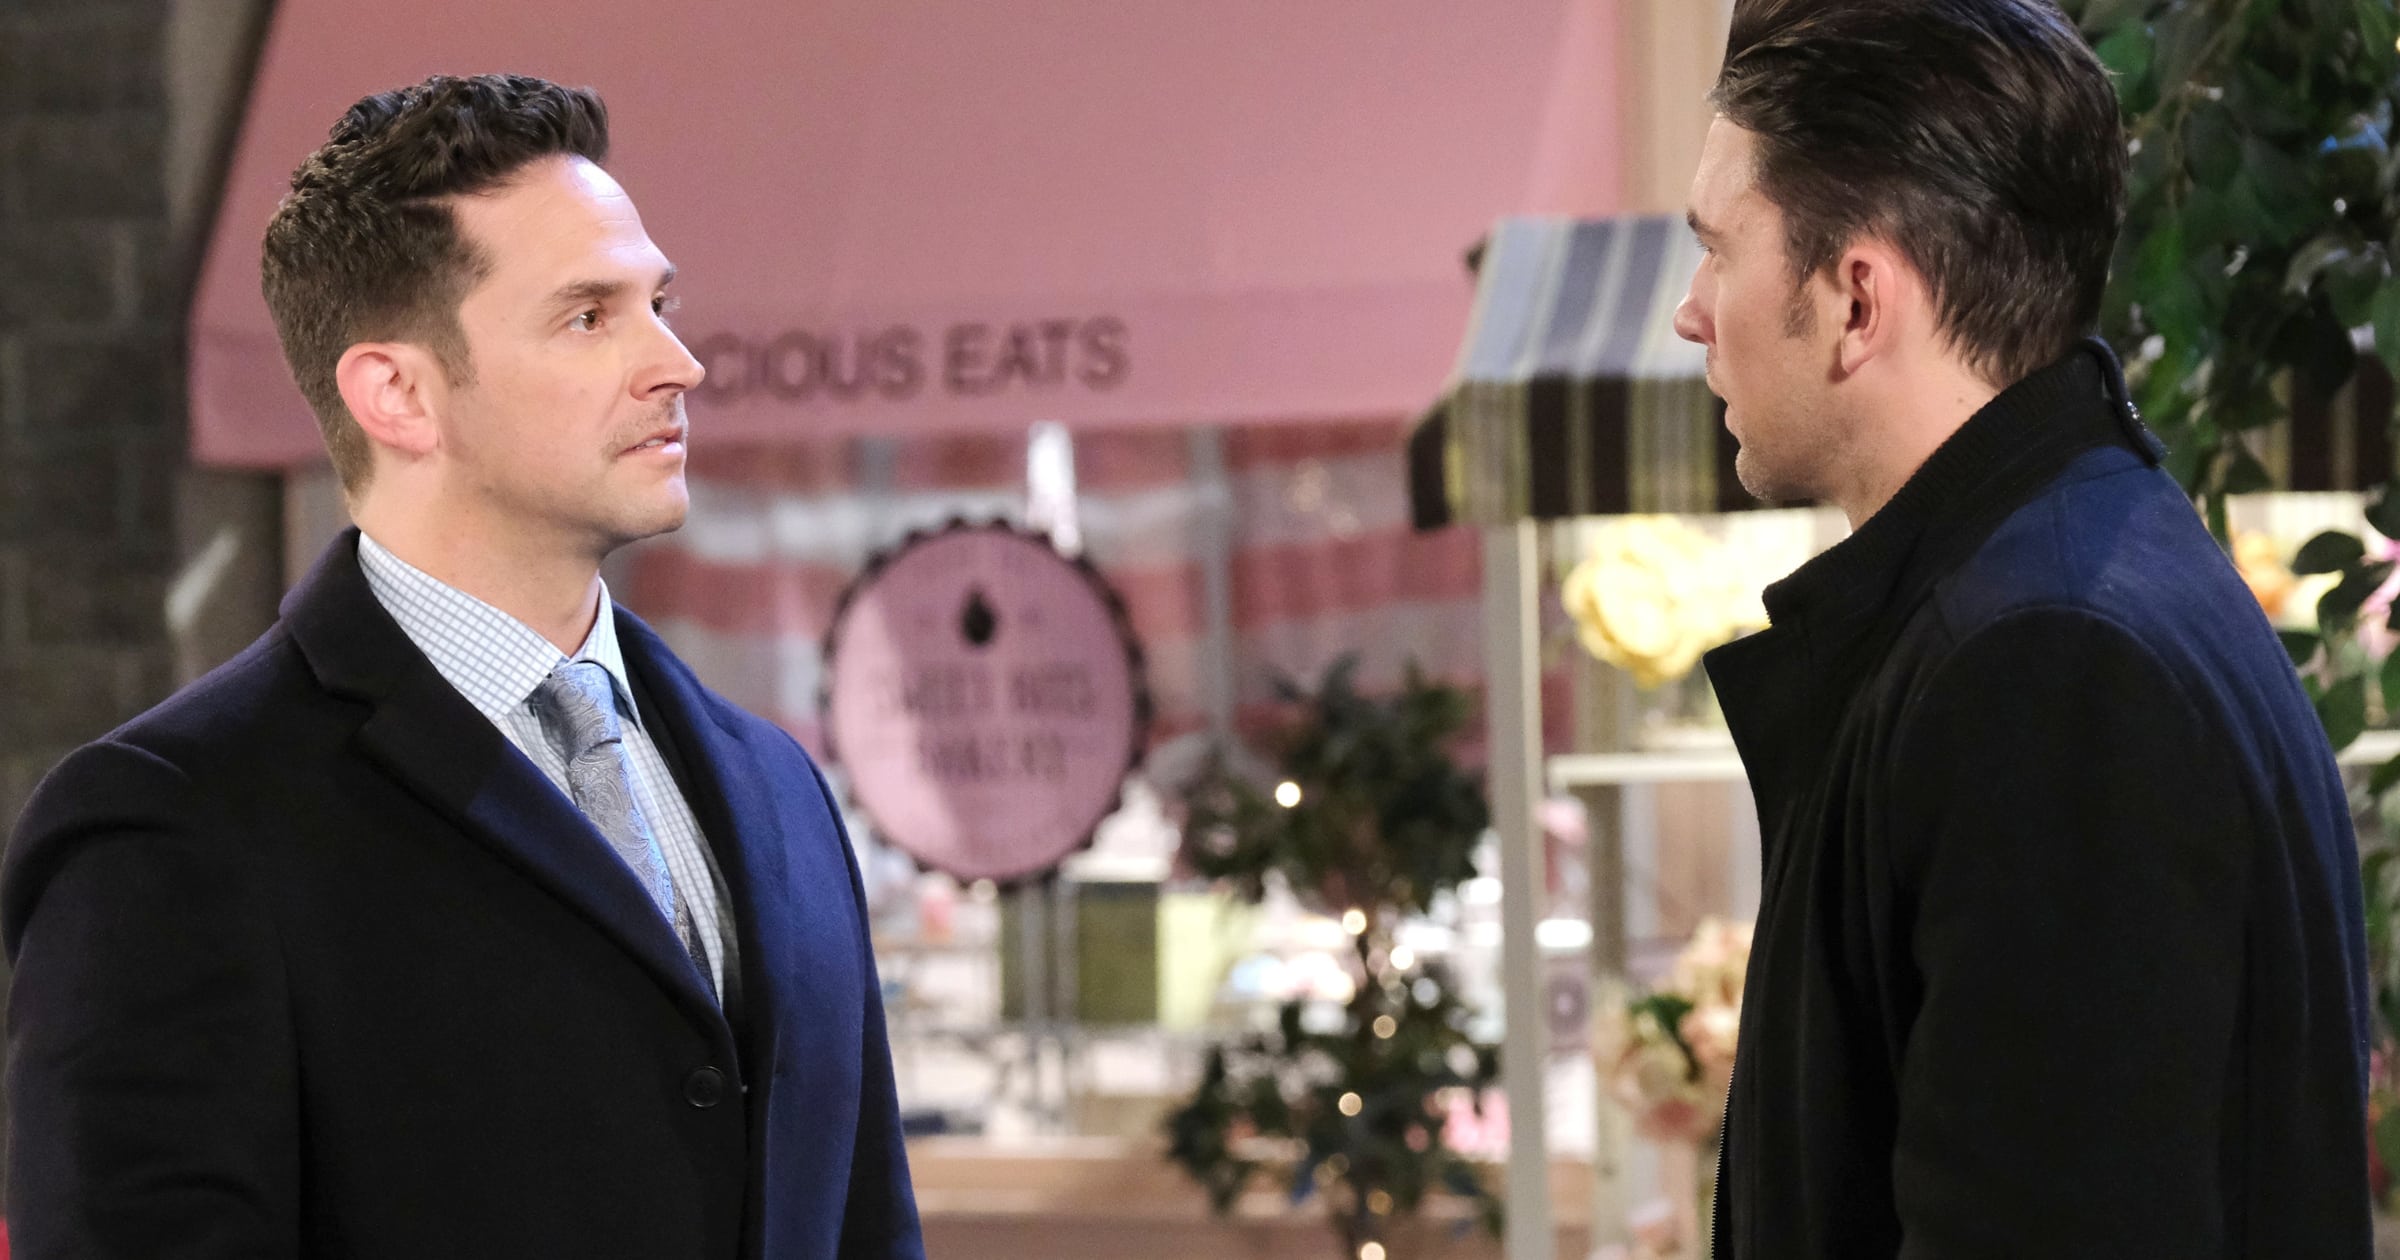 Days of Our Lives - Dec 6 - Stefan and Chad